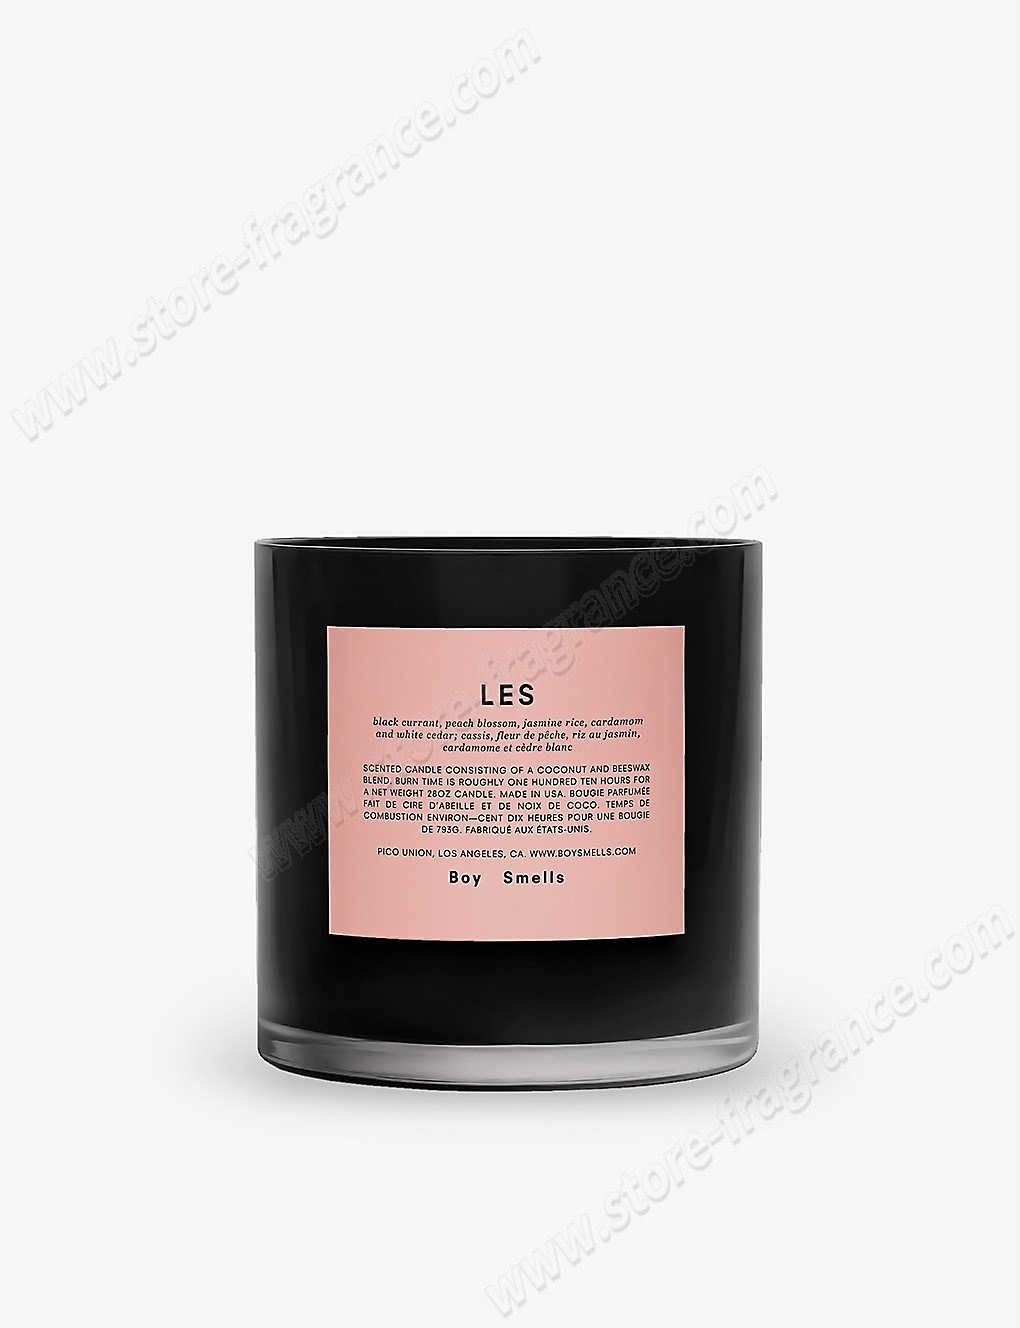 BOY SMELLS/LES scented candle 793g ✿ Discount Store - -0